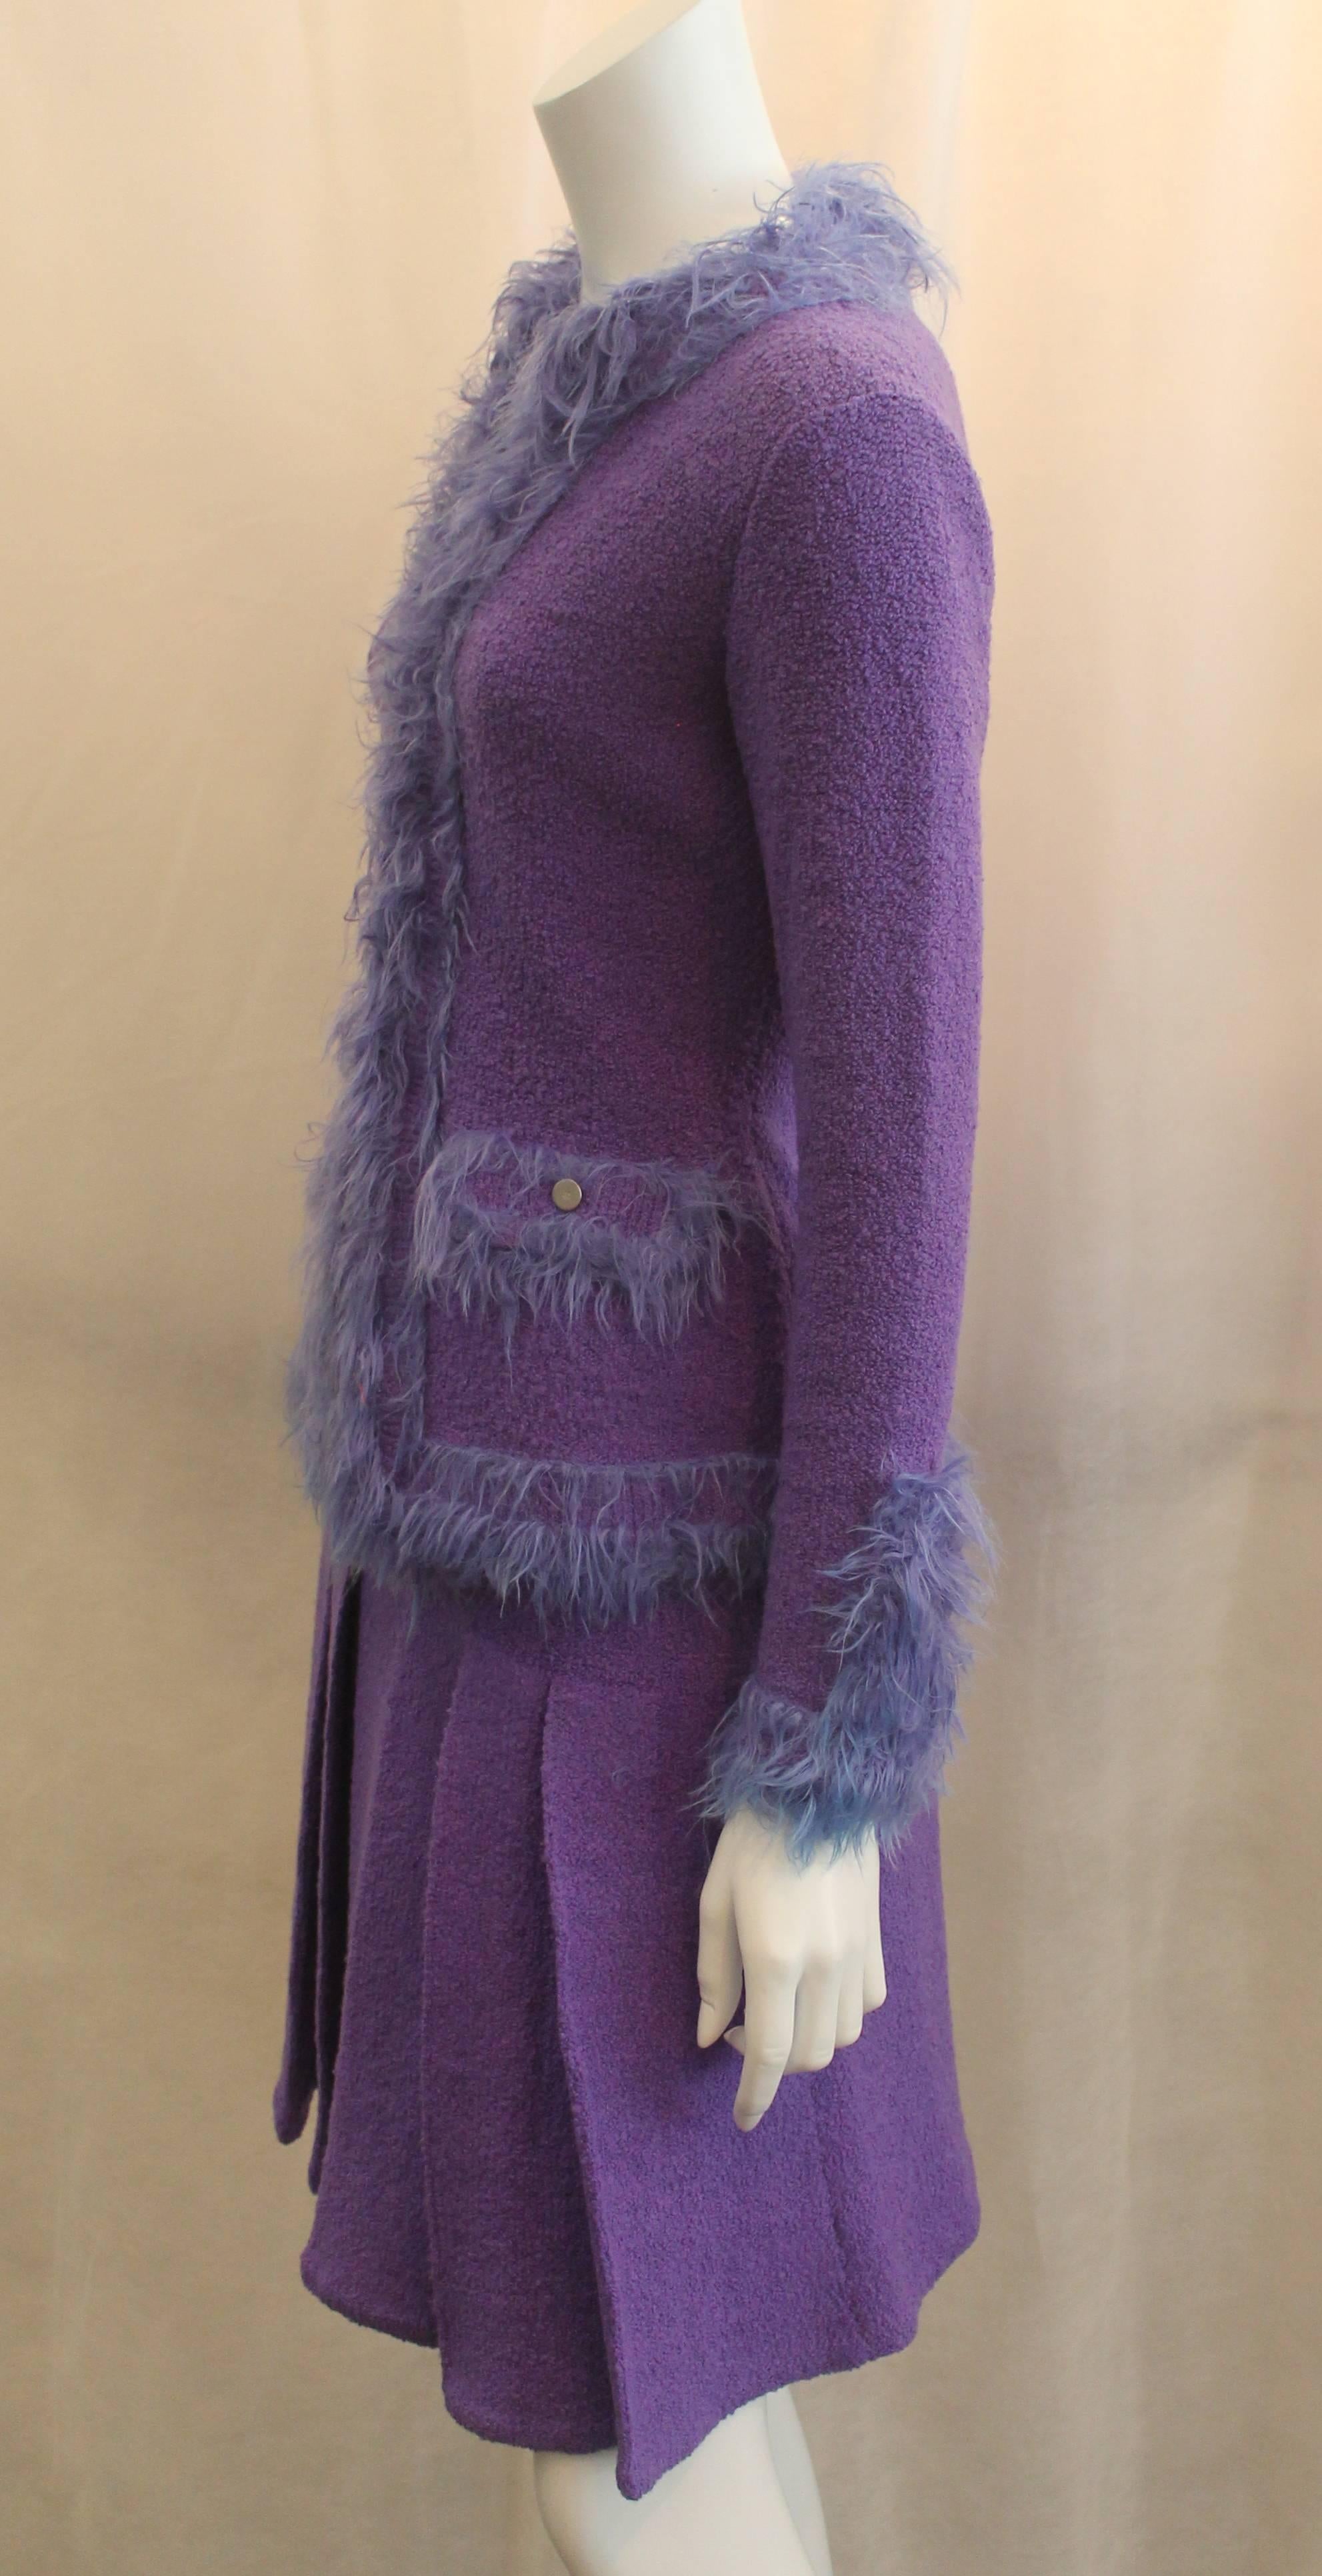 Chanel Purple Wool Skirt Suit with Faux Fur Trim - 38 - circa 99P
14. This set is in excellent vintage condition with minor wear. The jacket features 2 fake pockets with buttons and a long fur trim. The skirt has big pleats on the front